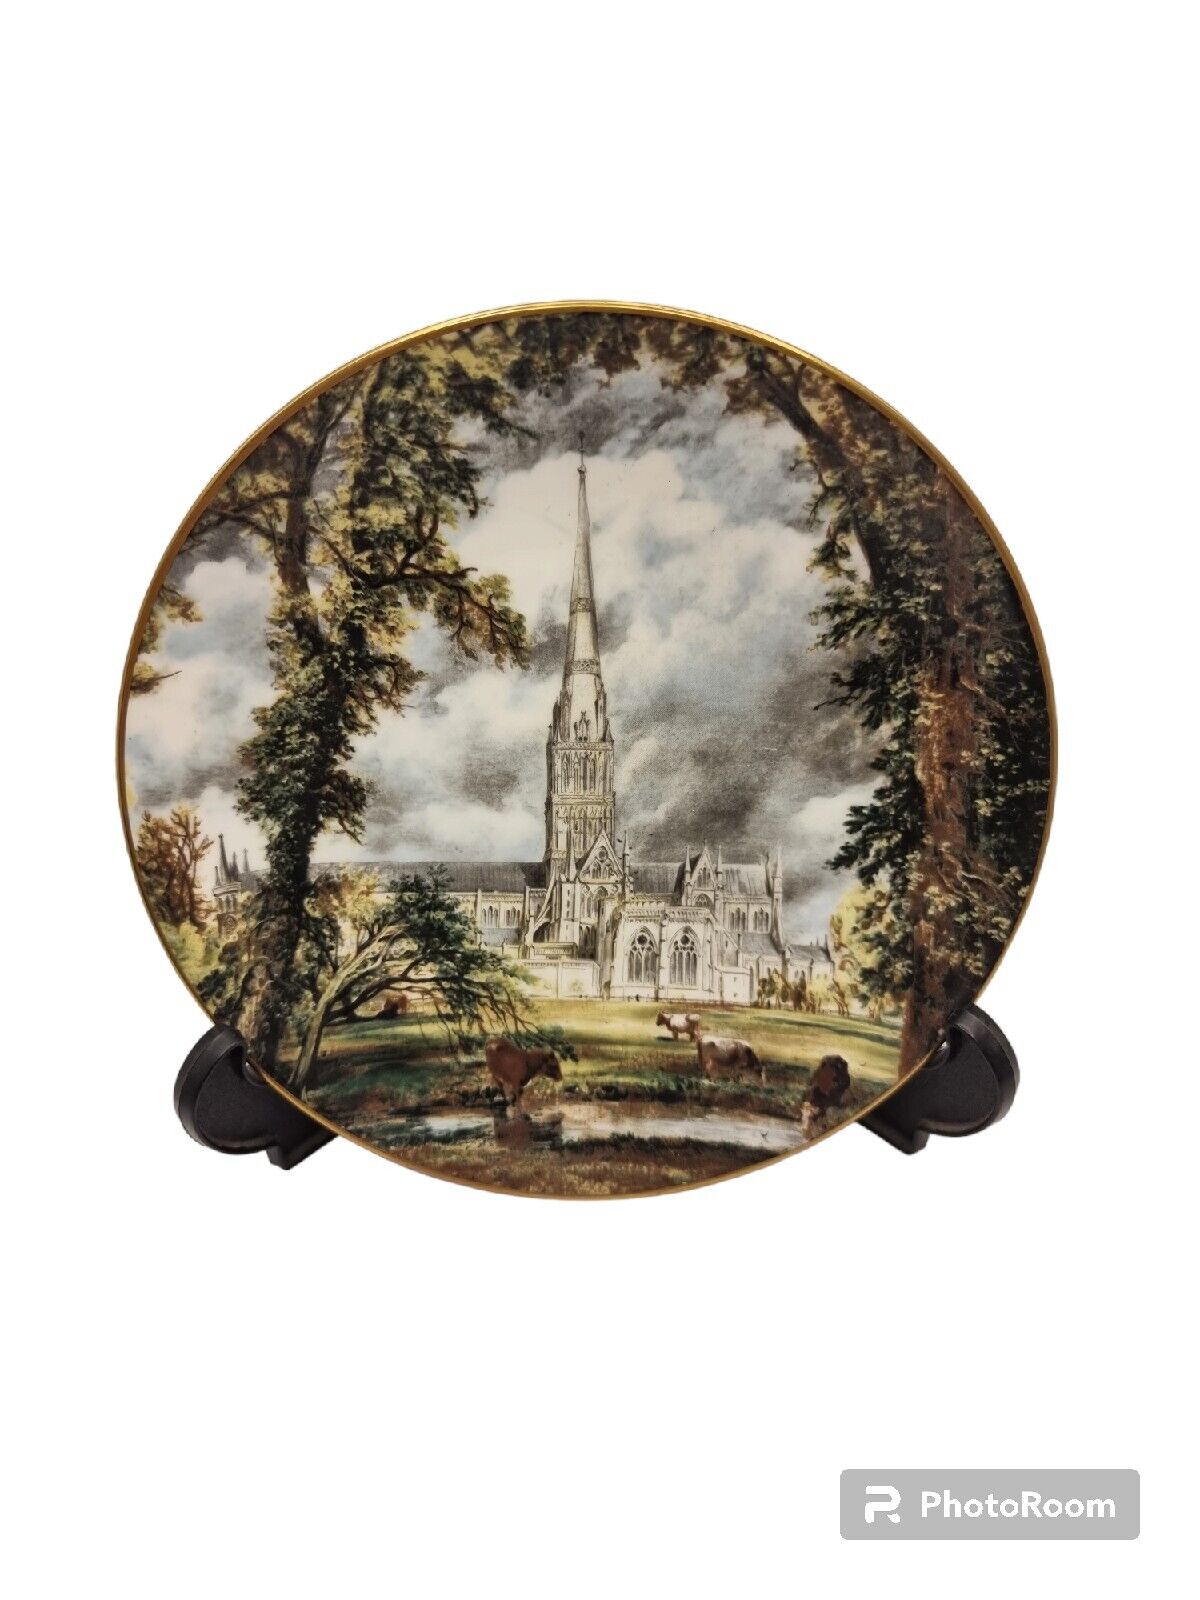 SALISBURY CATHEDRAL BY JOHN CONSTABLE 1788 - 1837 DECORATIVE PLATE ENGLAND